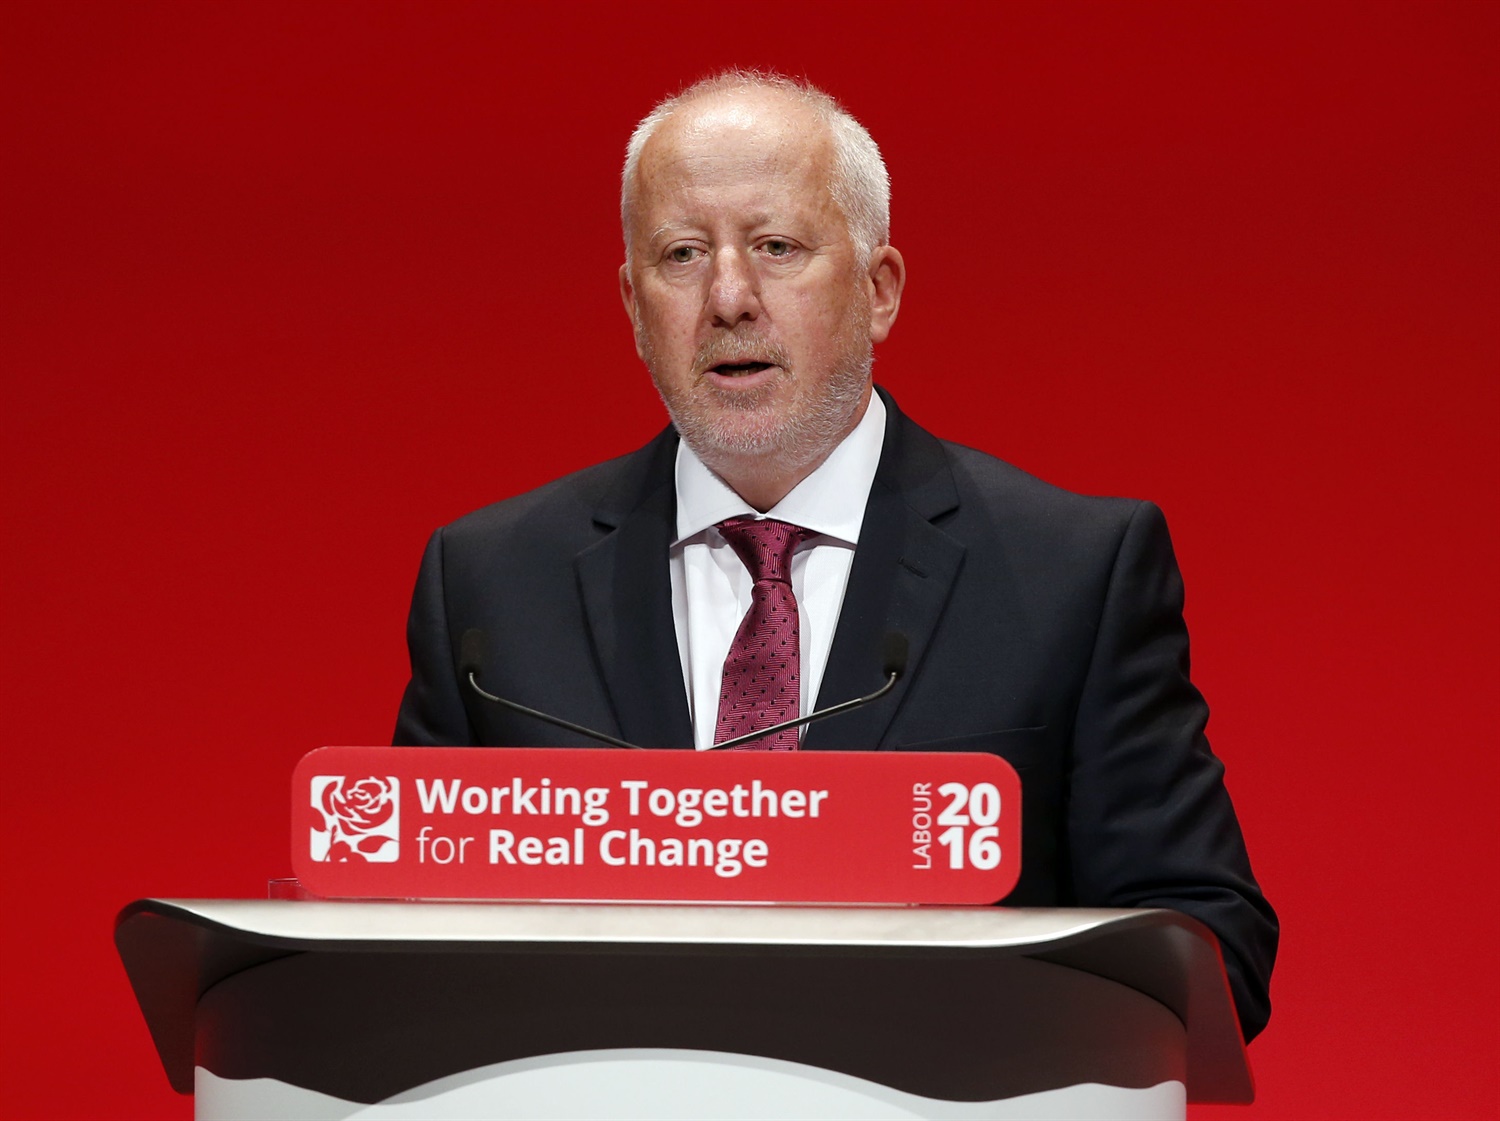 Shadow transport secretary McDonald considers extending control periods to 7 years